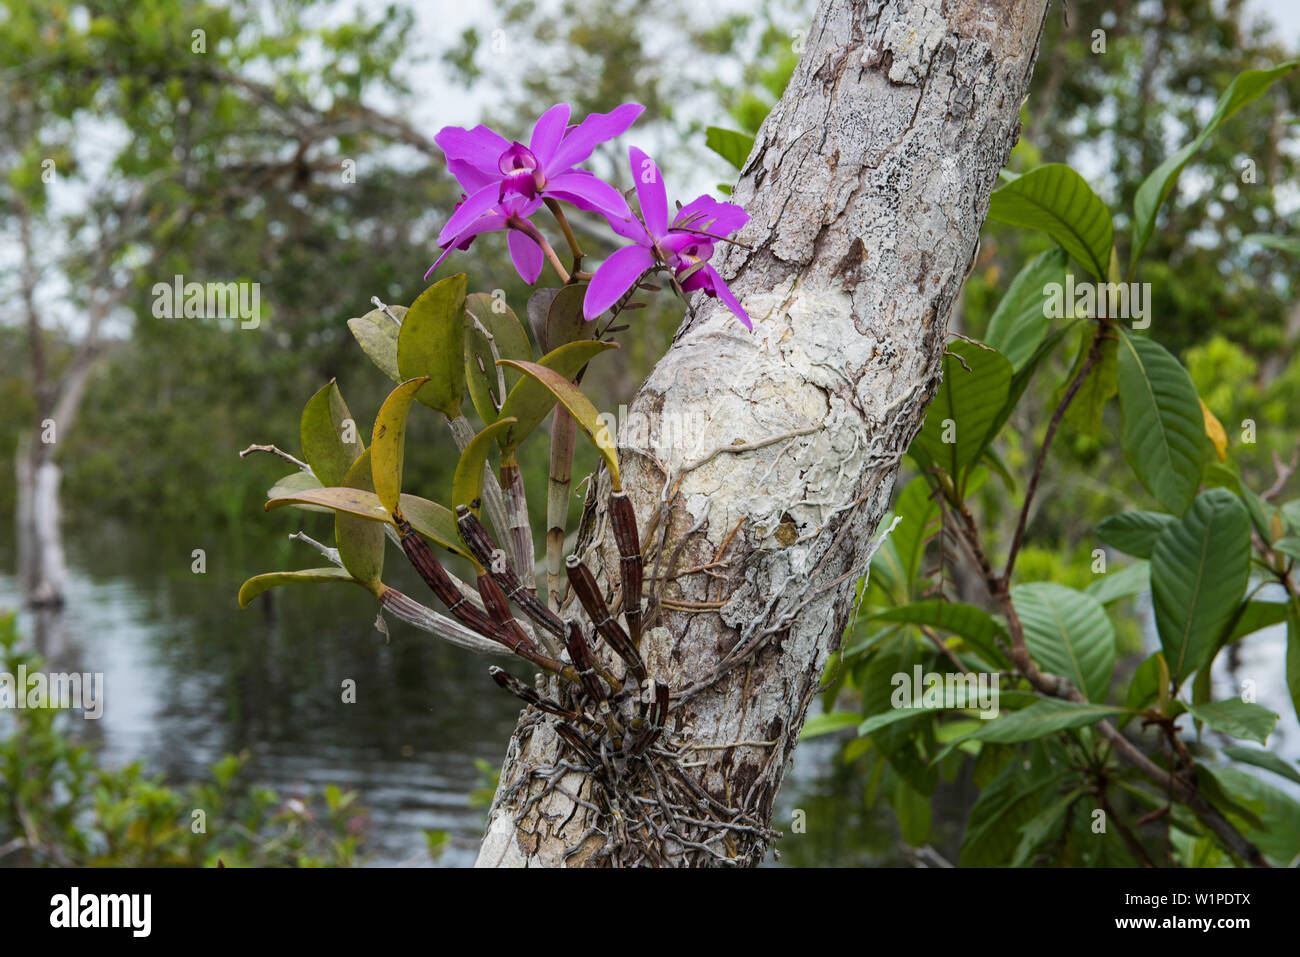 A Cattleya orchid (Cattleya labiata) grows high on the stem of a tree in a flooded area along the Amazon River, Jutai, Amazonas, Brazil, South America Stock Photo